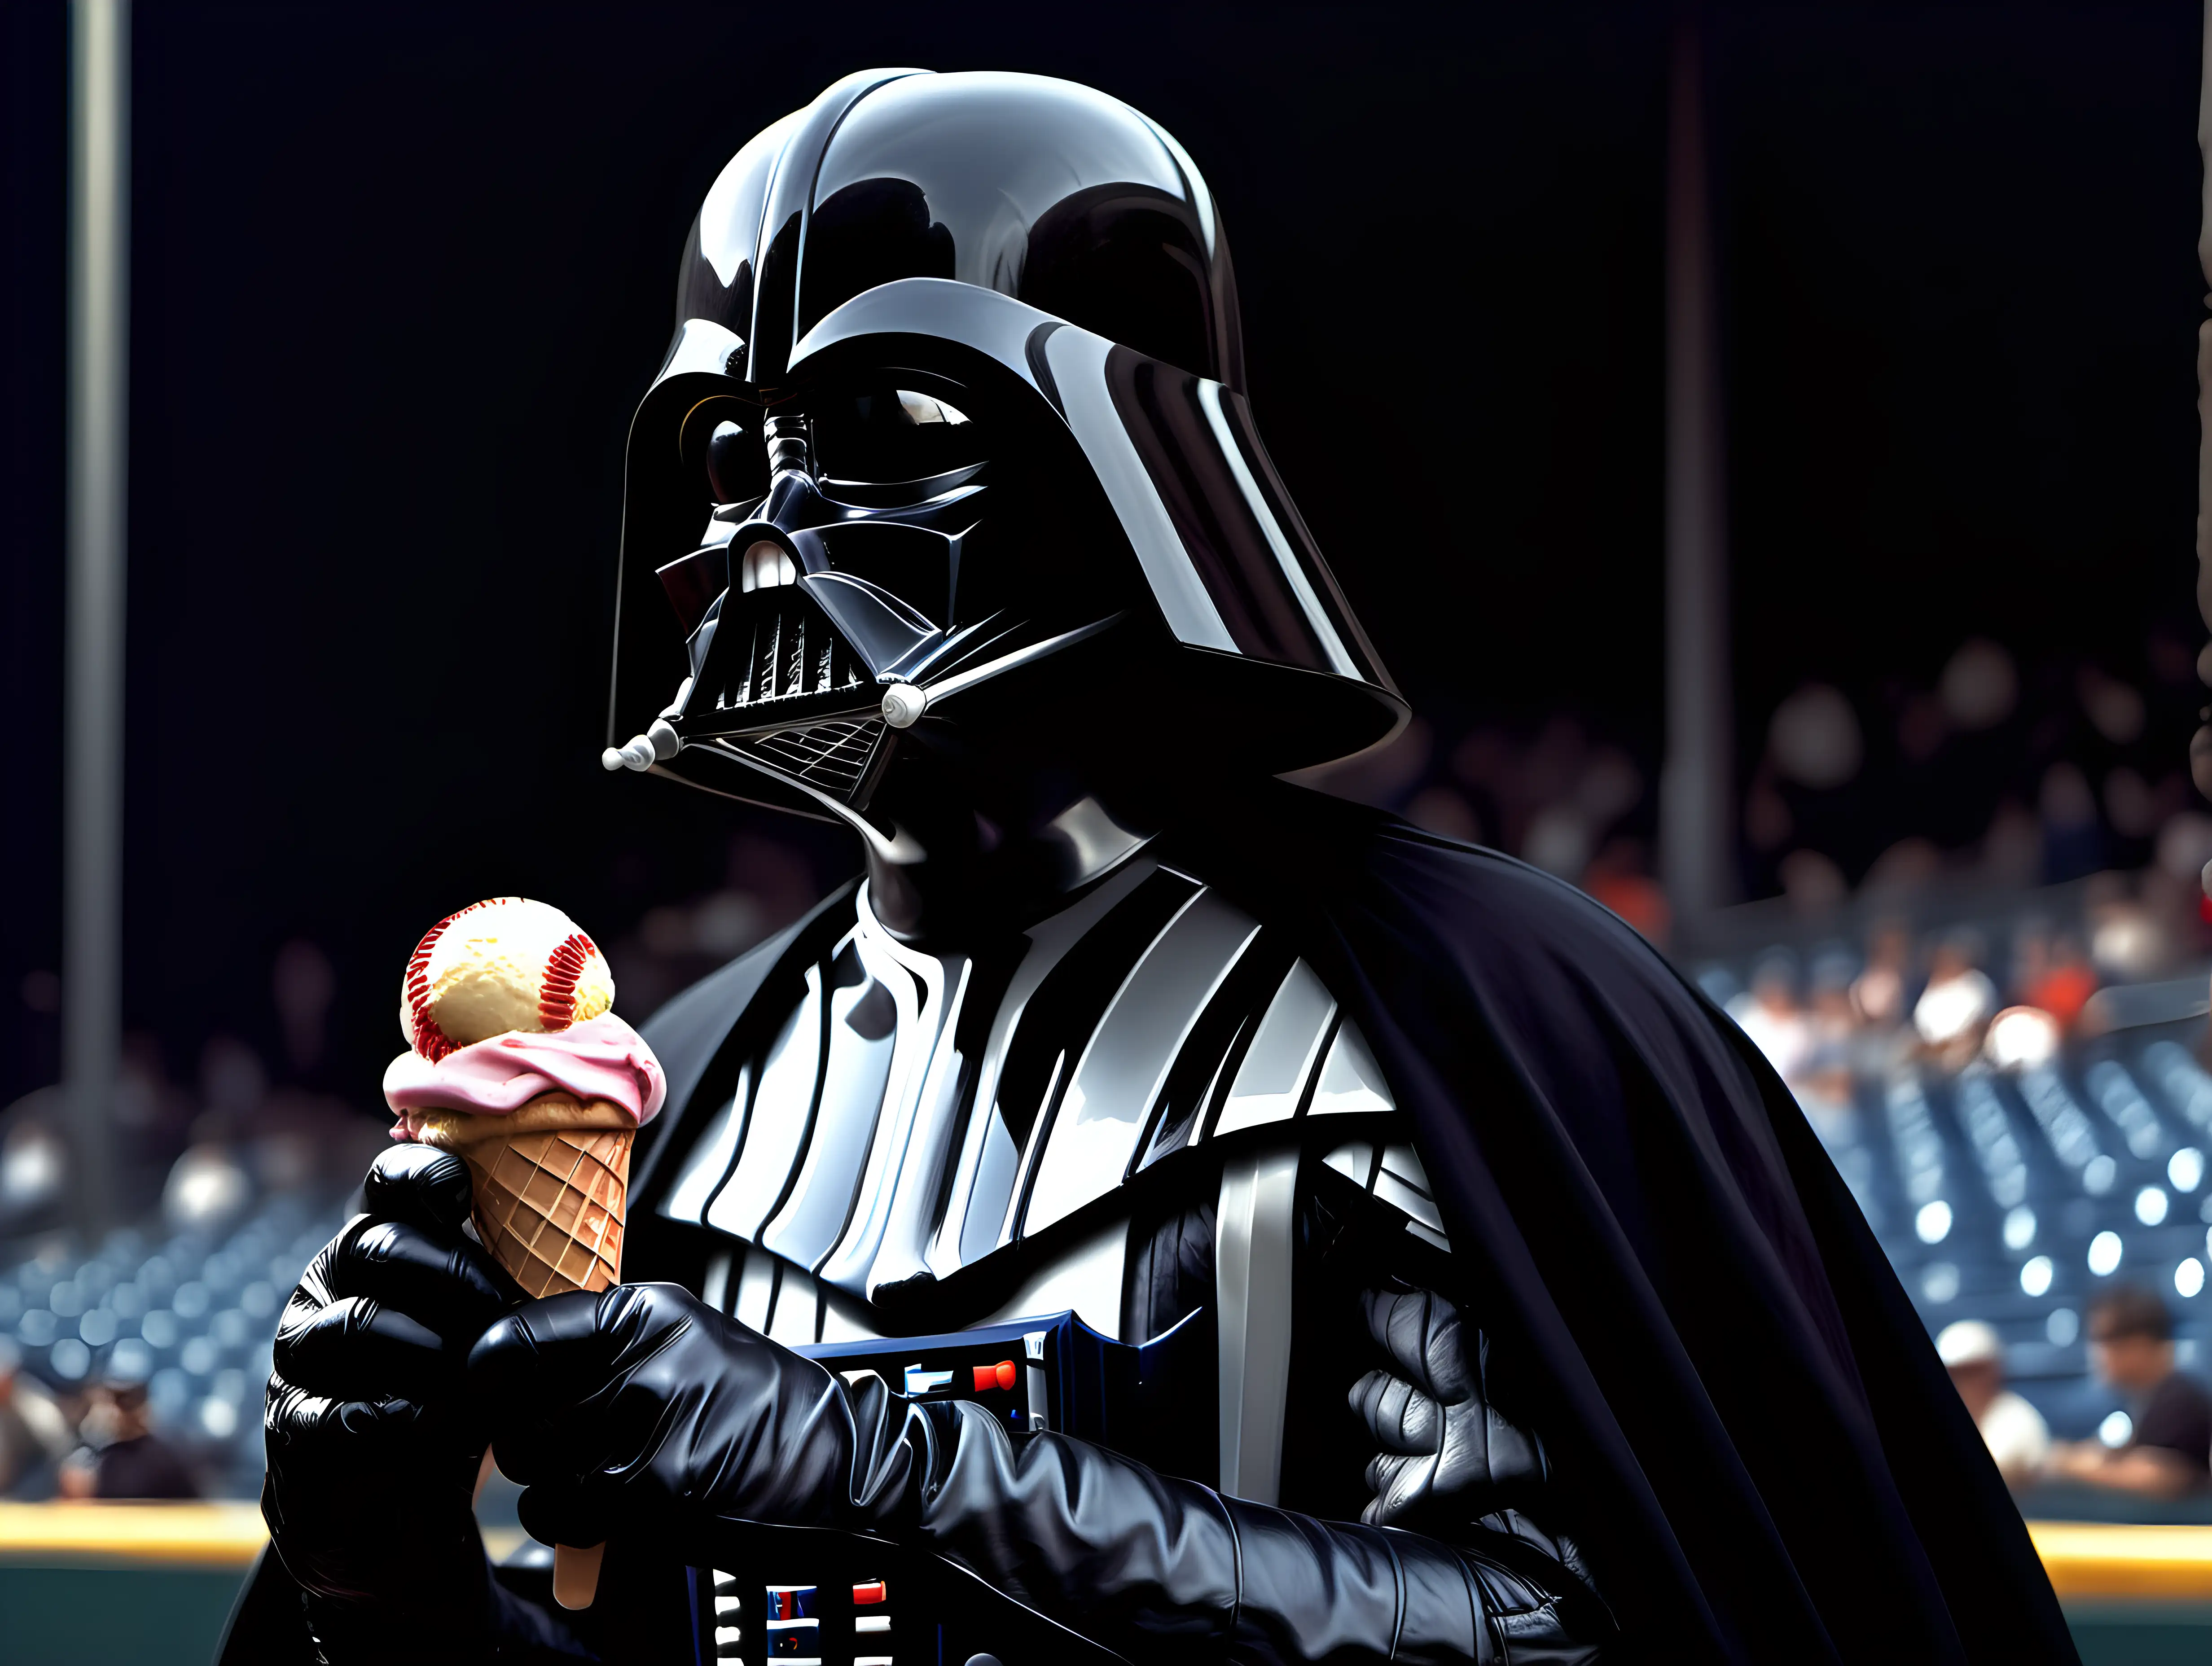 Darth Vader eating ice cream at a baseball game in style of photorealism by frank frazetta, photograph, high detail, elegant, close up and dark background